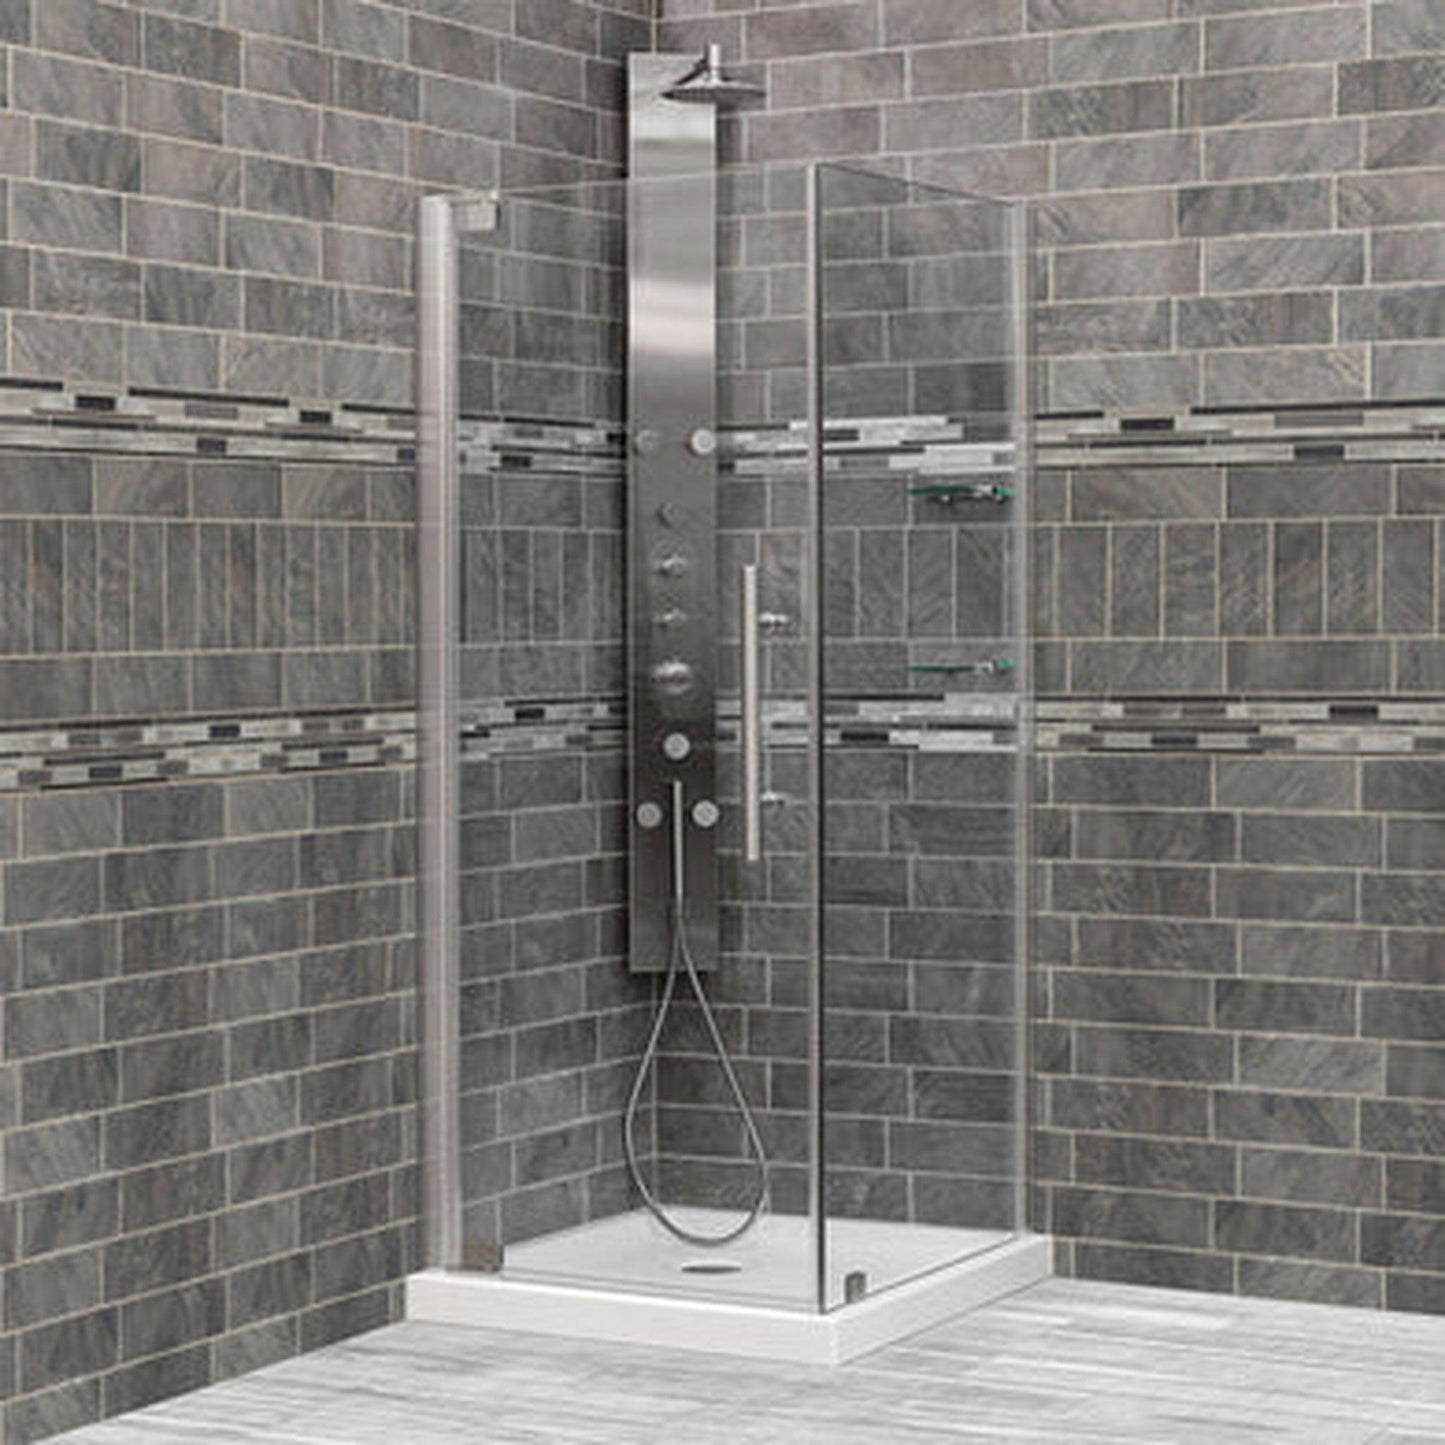 LessCare Ultra-G 29 3/8-30" x 72" x 34-35" Chrome Swing-Out Shower Enclosure